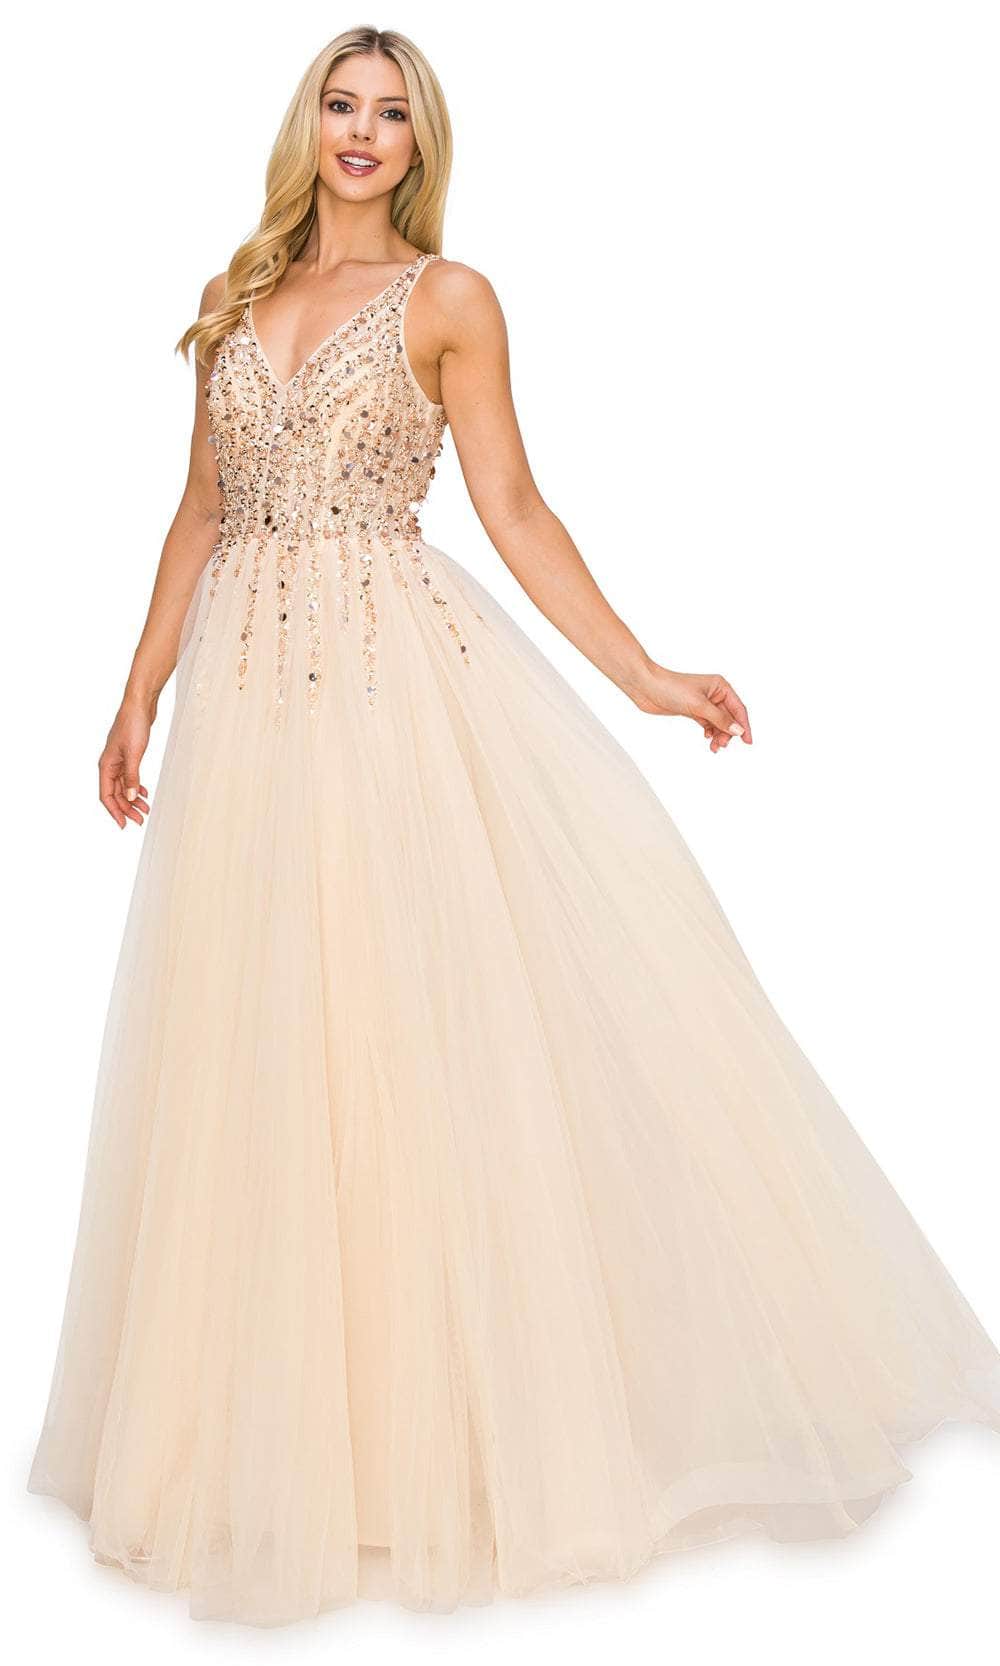 Cinderella Couture 8034J - Plunging V-Back Prom Gown Special Occasion Dress